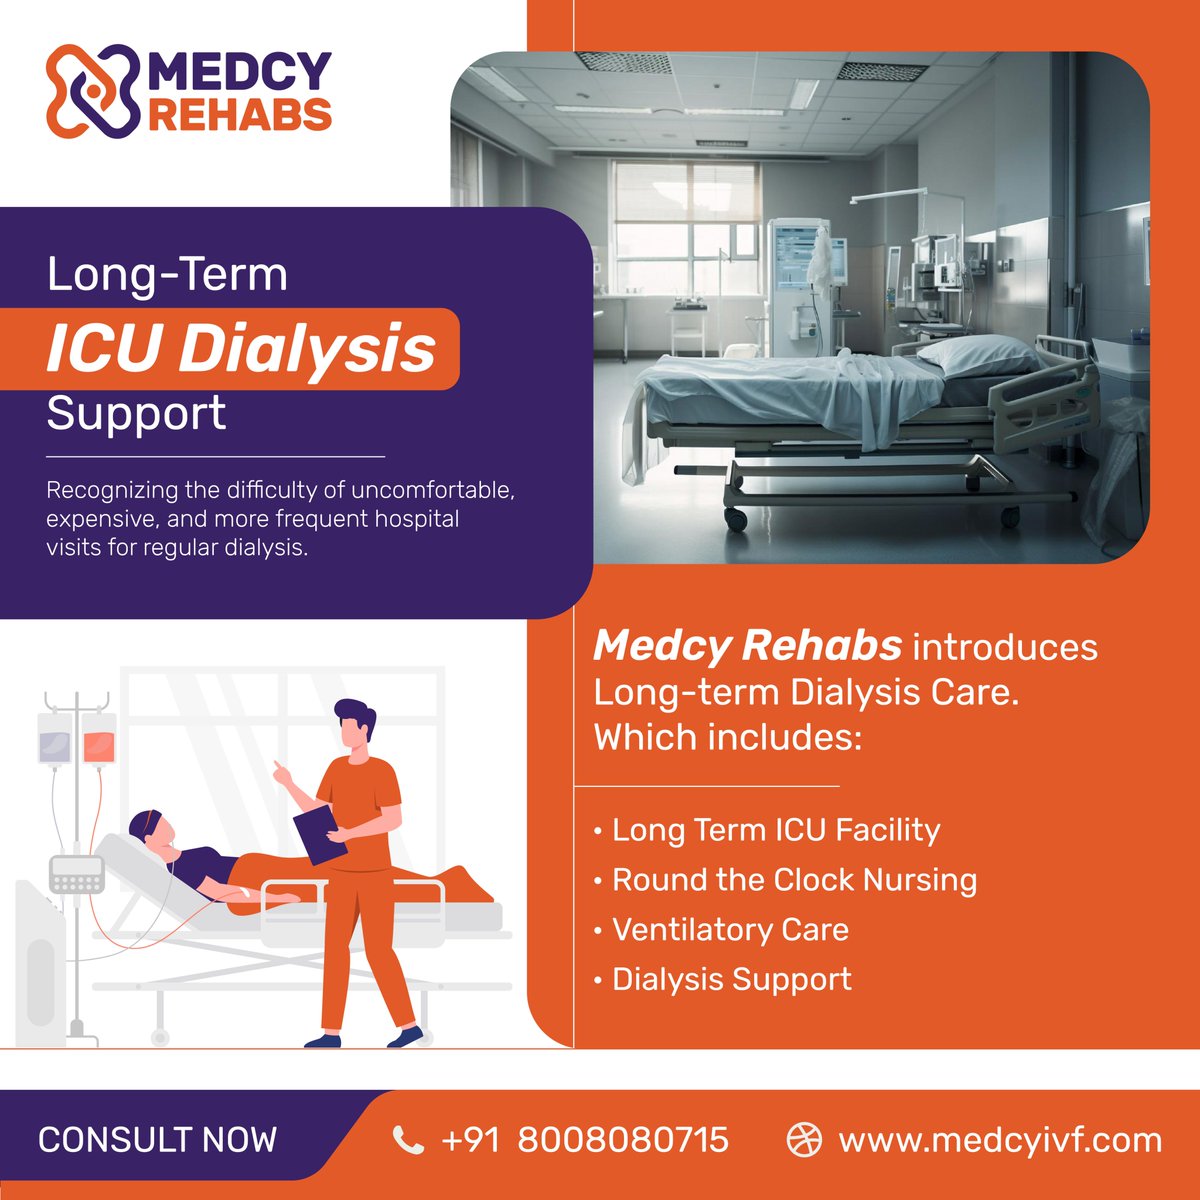 Introducing Long-Term ICU Dialysis Support at Medcy Rehabs.
Saying goodbye to the challenges of regular dialysis treatments! We're proud to unveil our innovative Long-Term ICU Dialysis Support program, redefining the way you experience care.

#LongTermICUDialysis #DialysisSupport